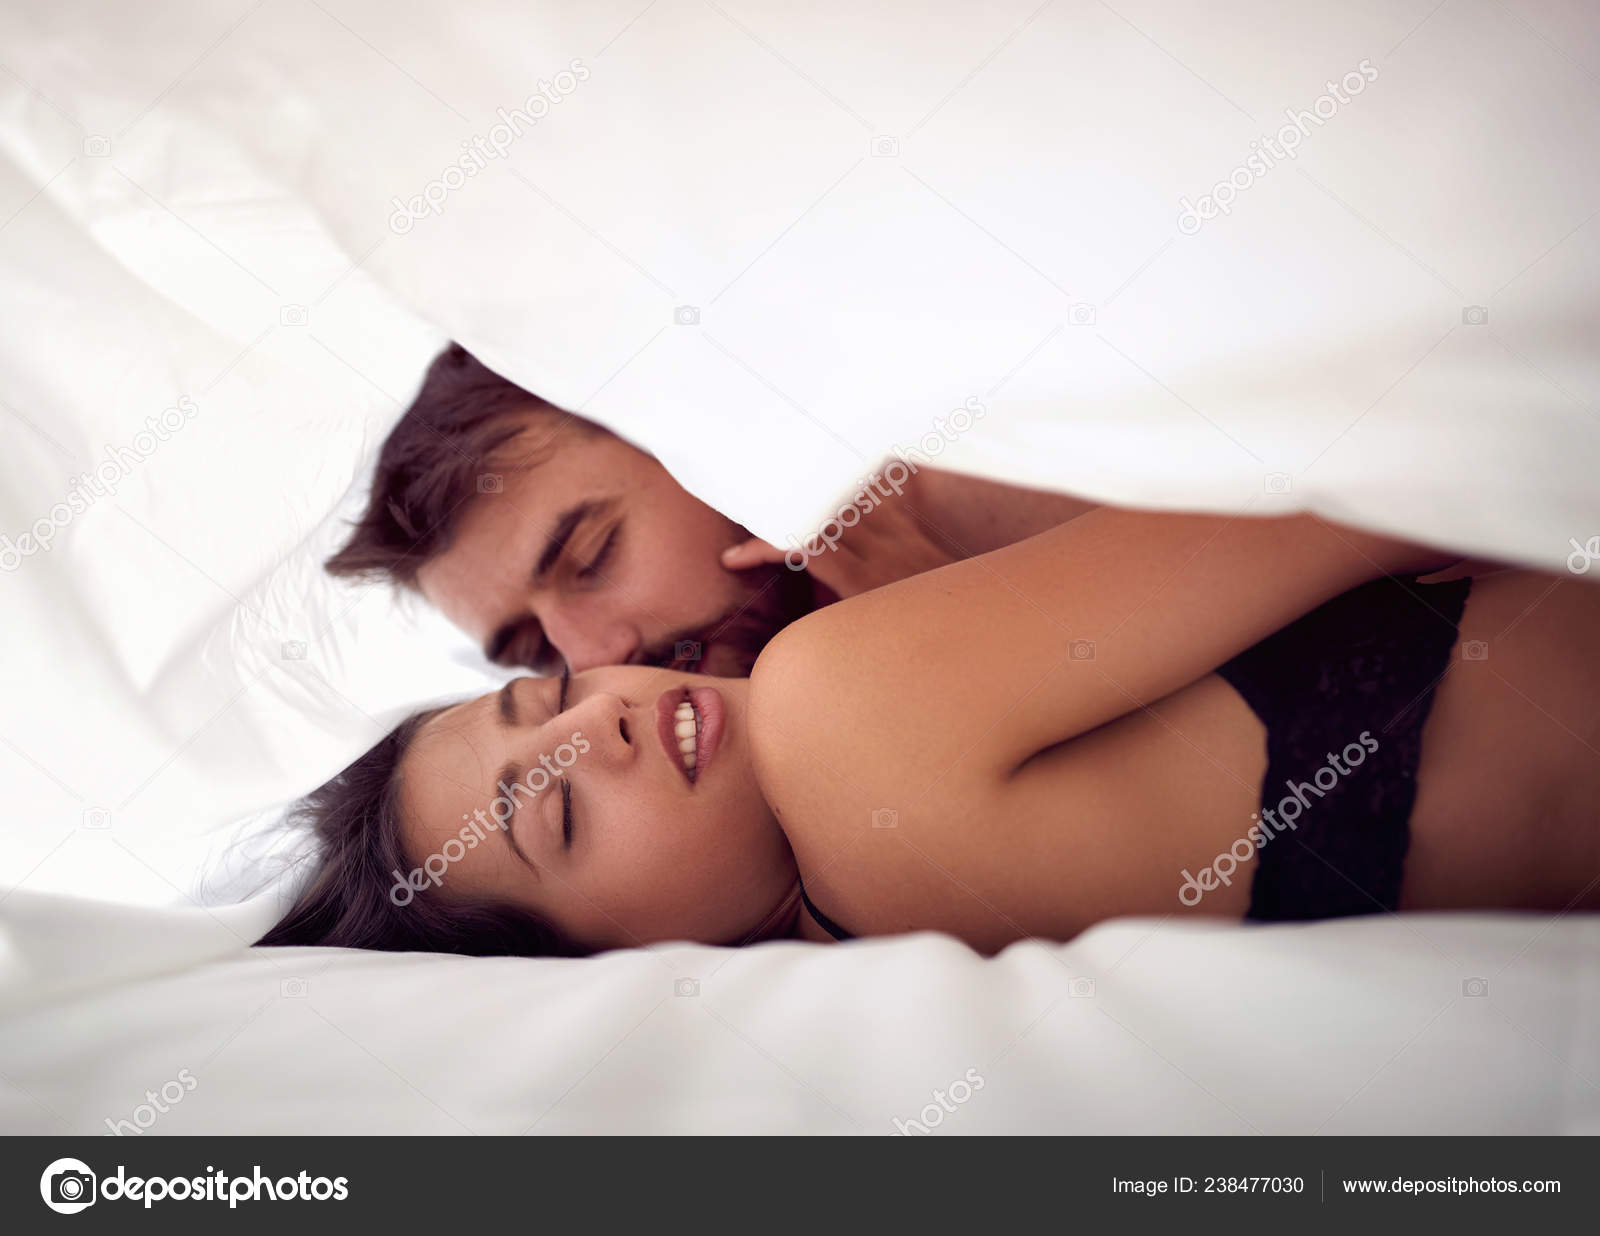 Passionate Couple Kissing Boy Girl Having Sex Young Lovers People Stock Photo by ©luckybusiness 238477030 pic